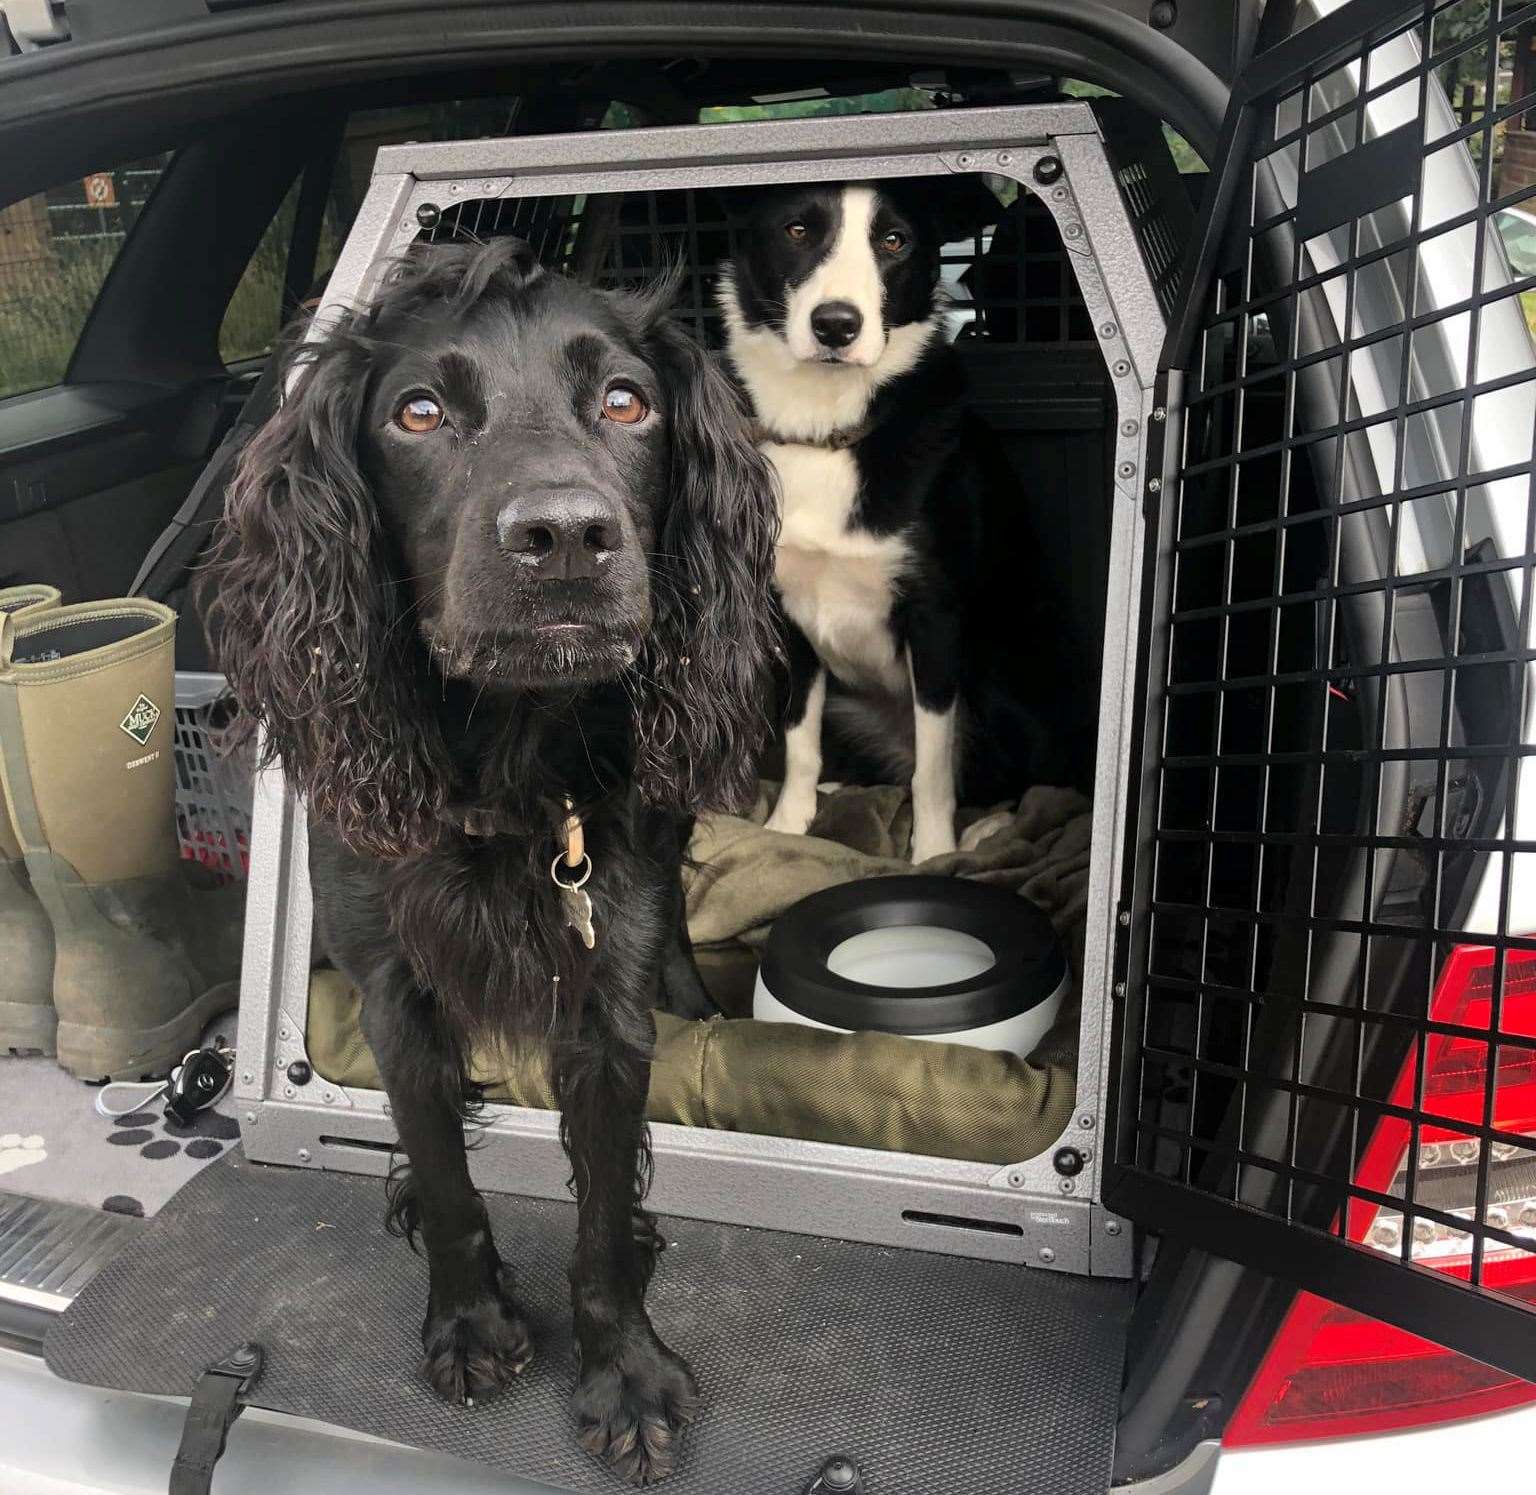 Miss Schofield says the crate in the back of her car saved her dog’s life. Picture: Hayley Schofield